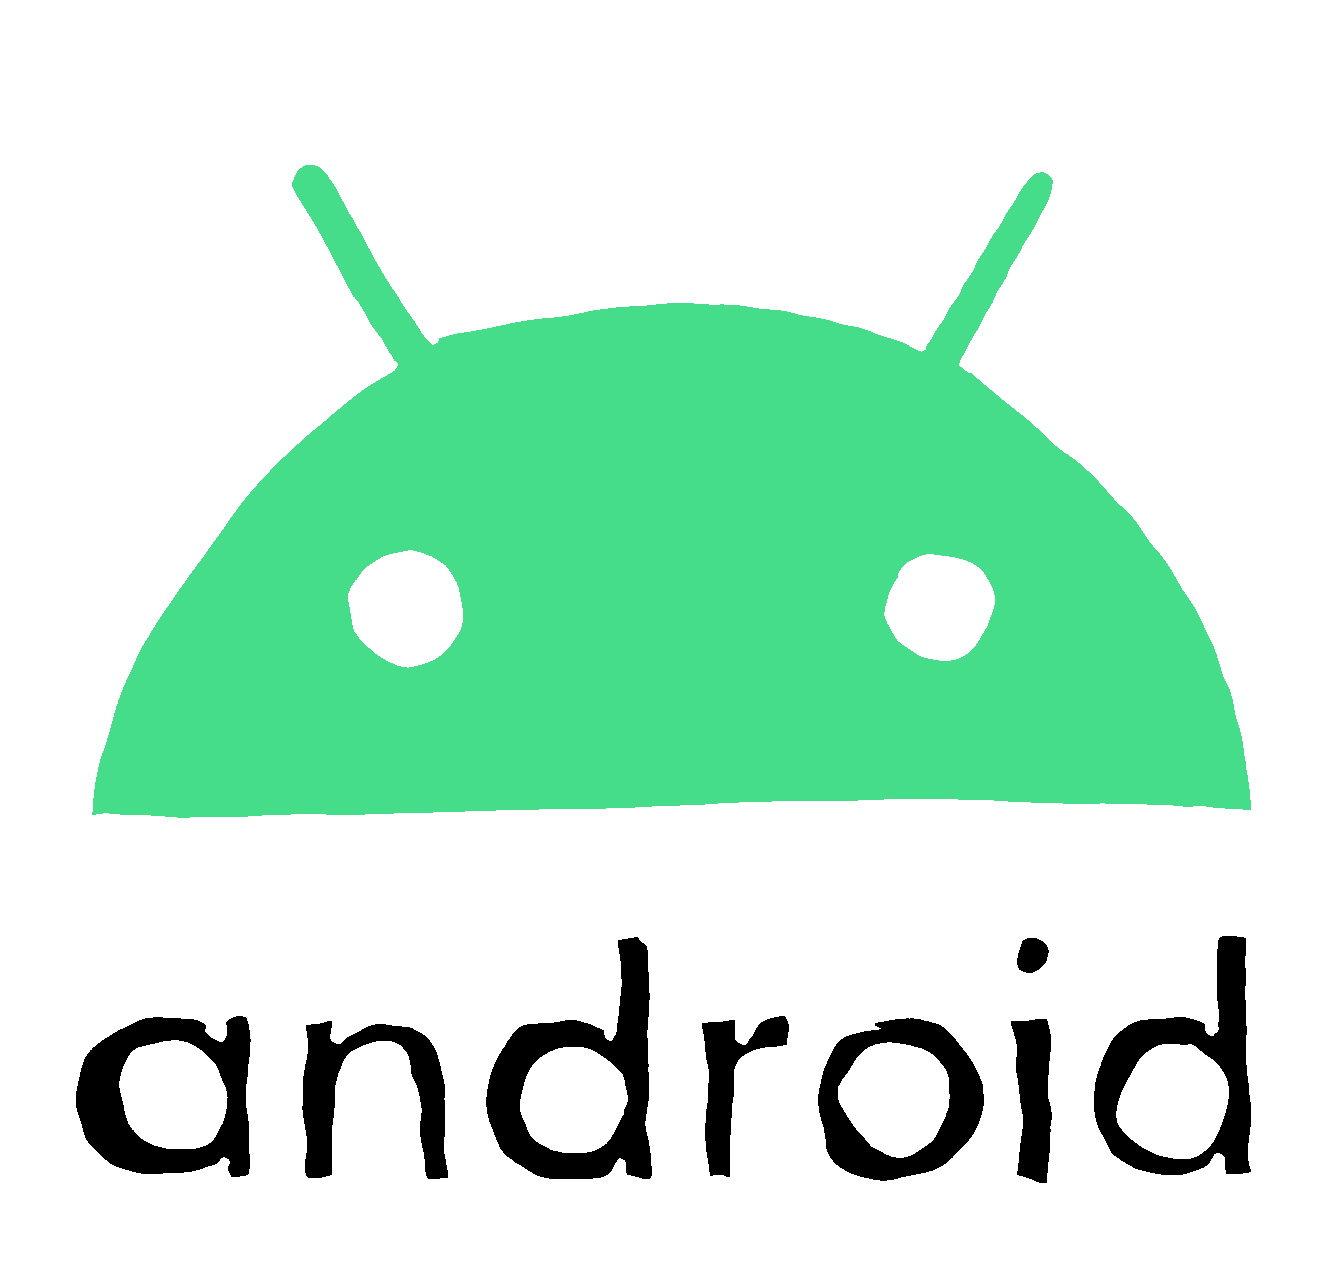 Android logo pencil.png